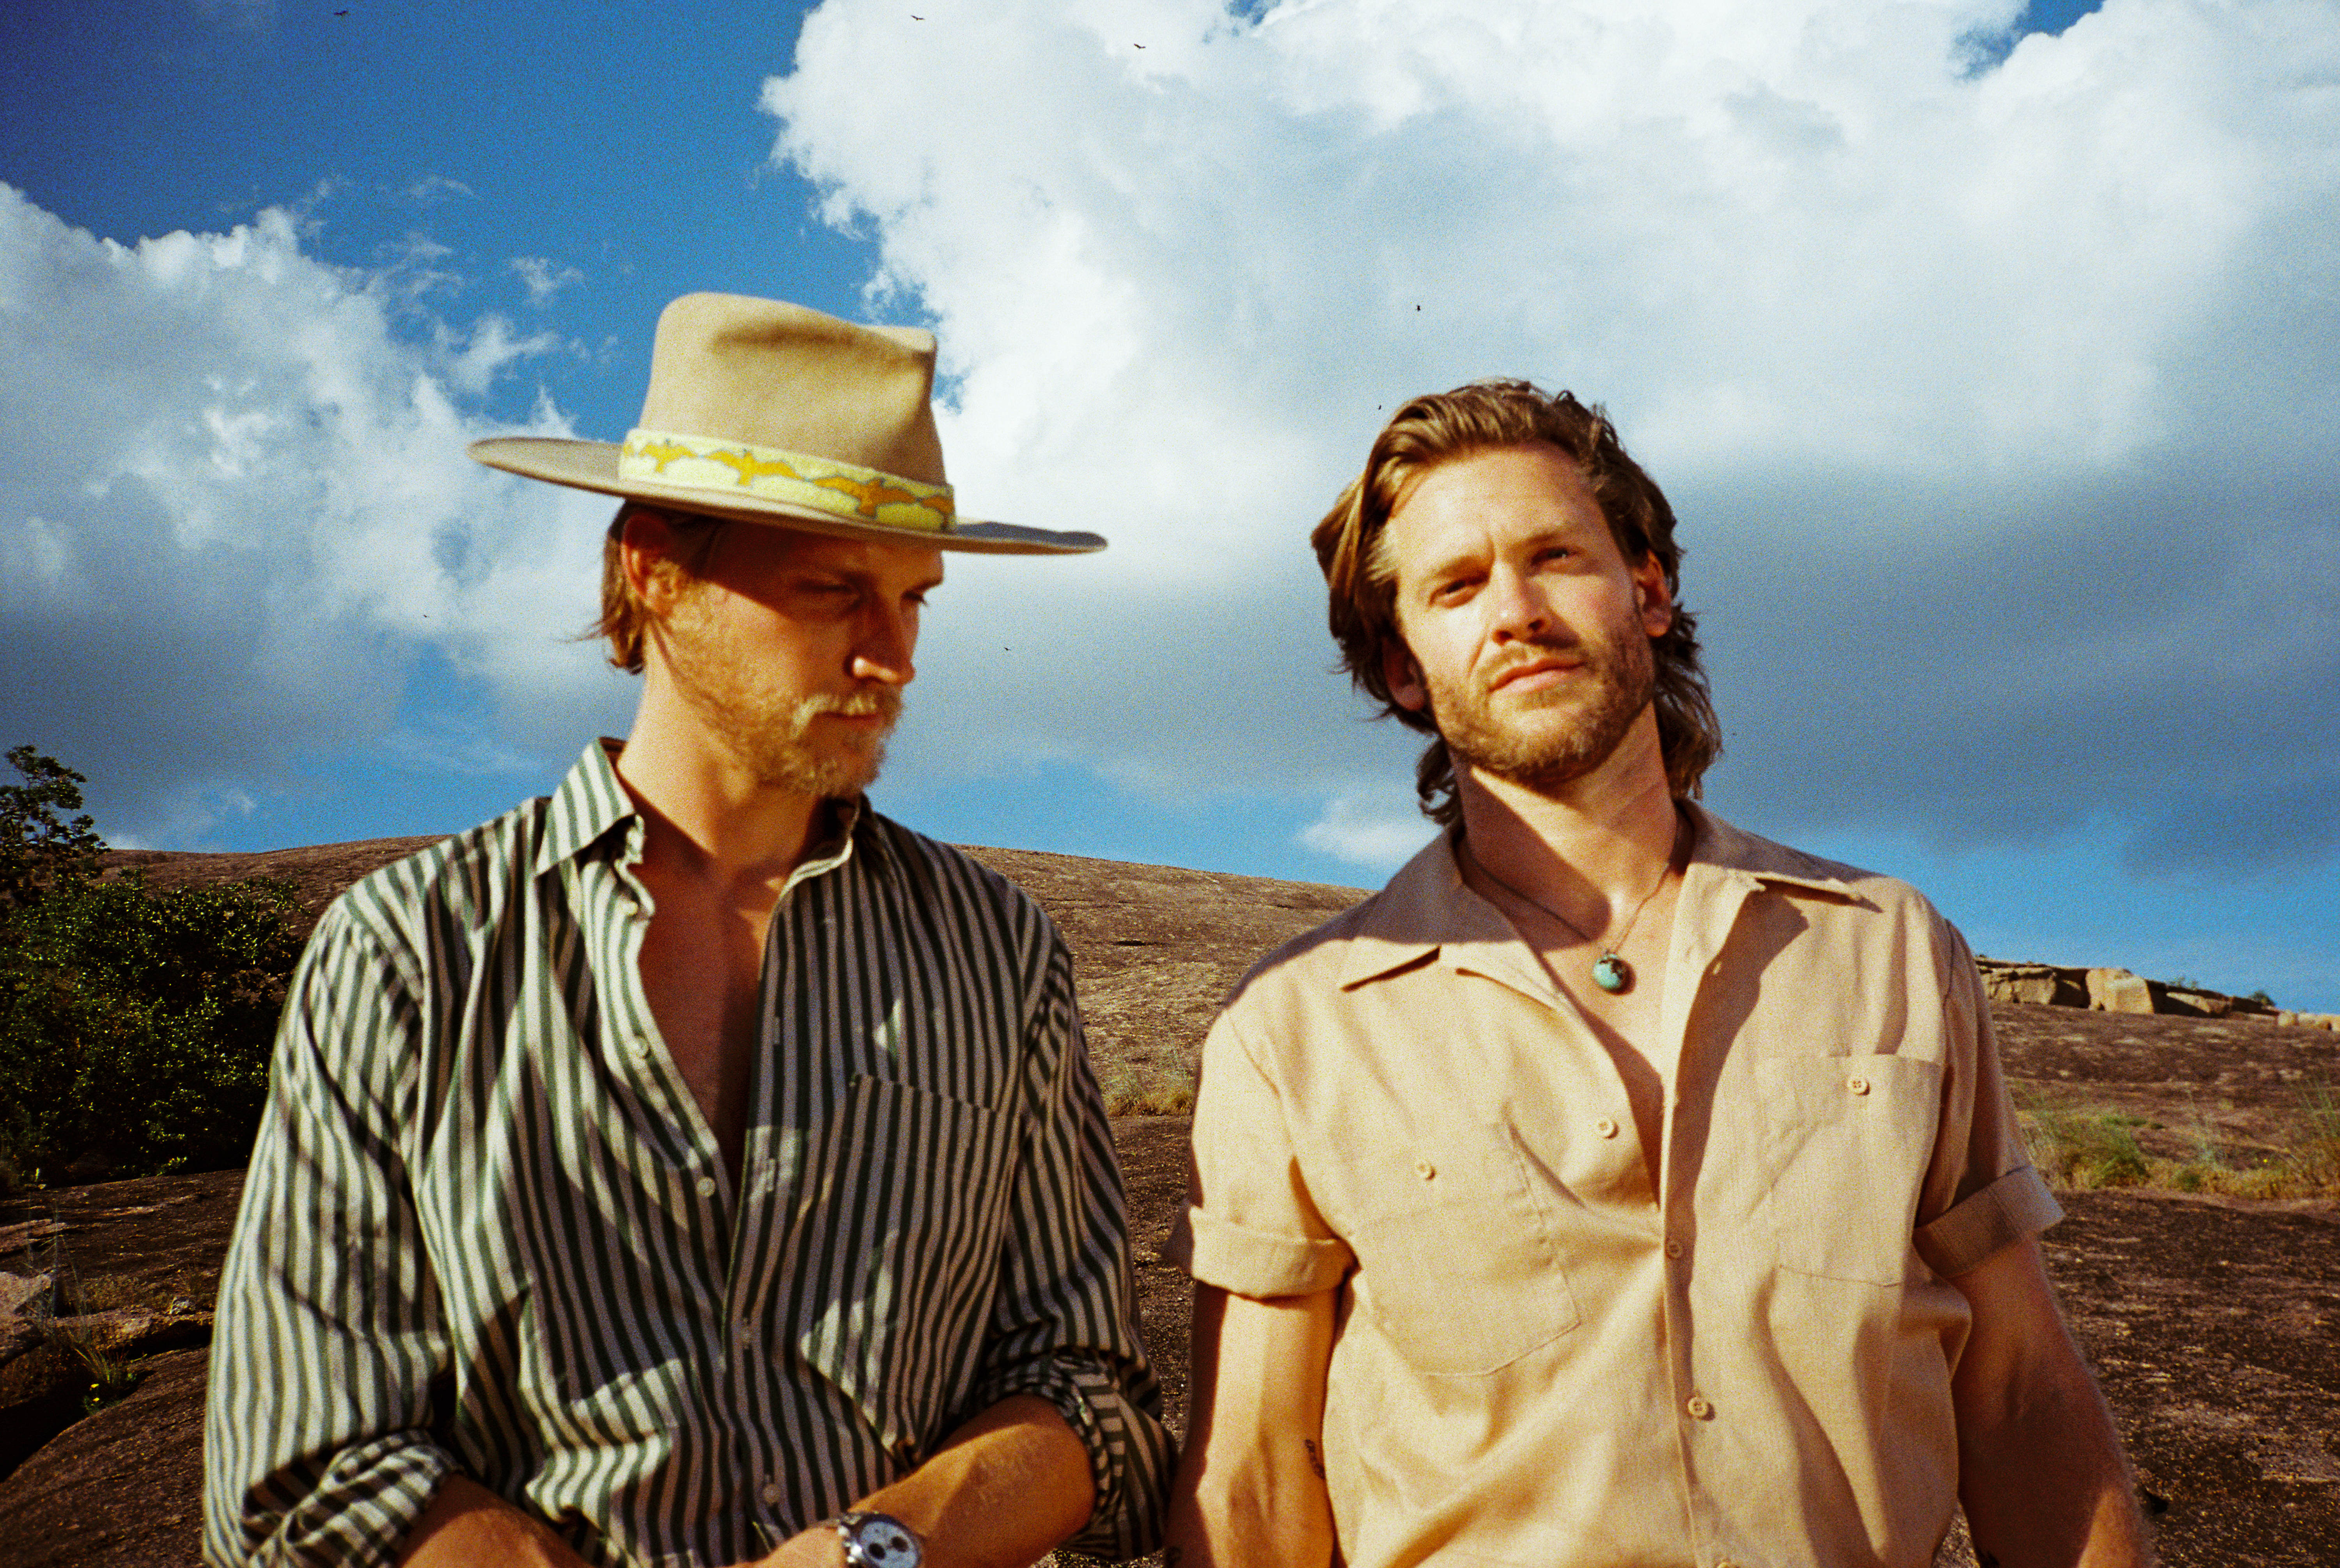 Zach Chance, wearing a hat and a shirt with green stripes, stands next to Jonathan Clay, wearing a tan shirt, outside under a cloudy sky. 